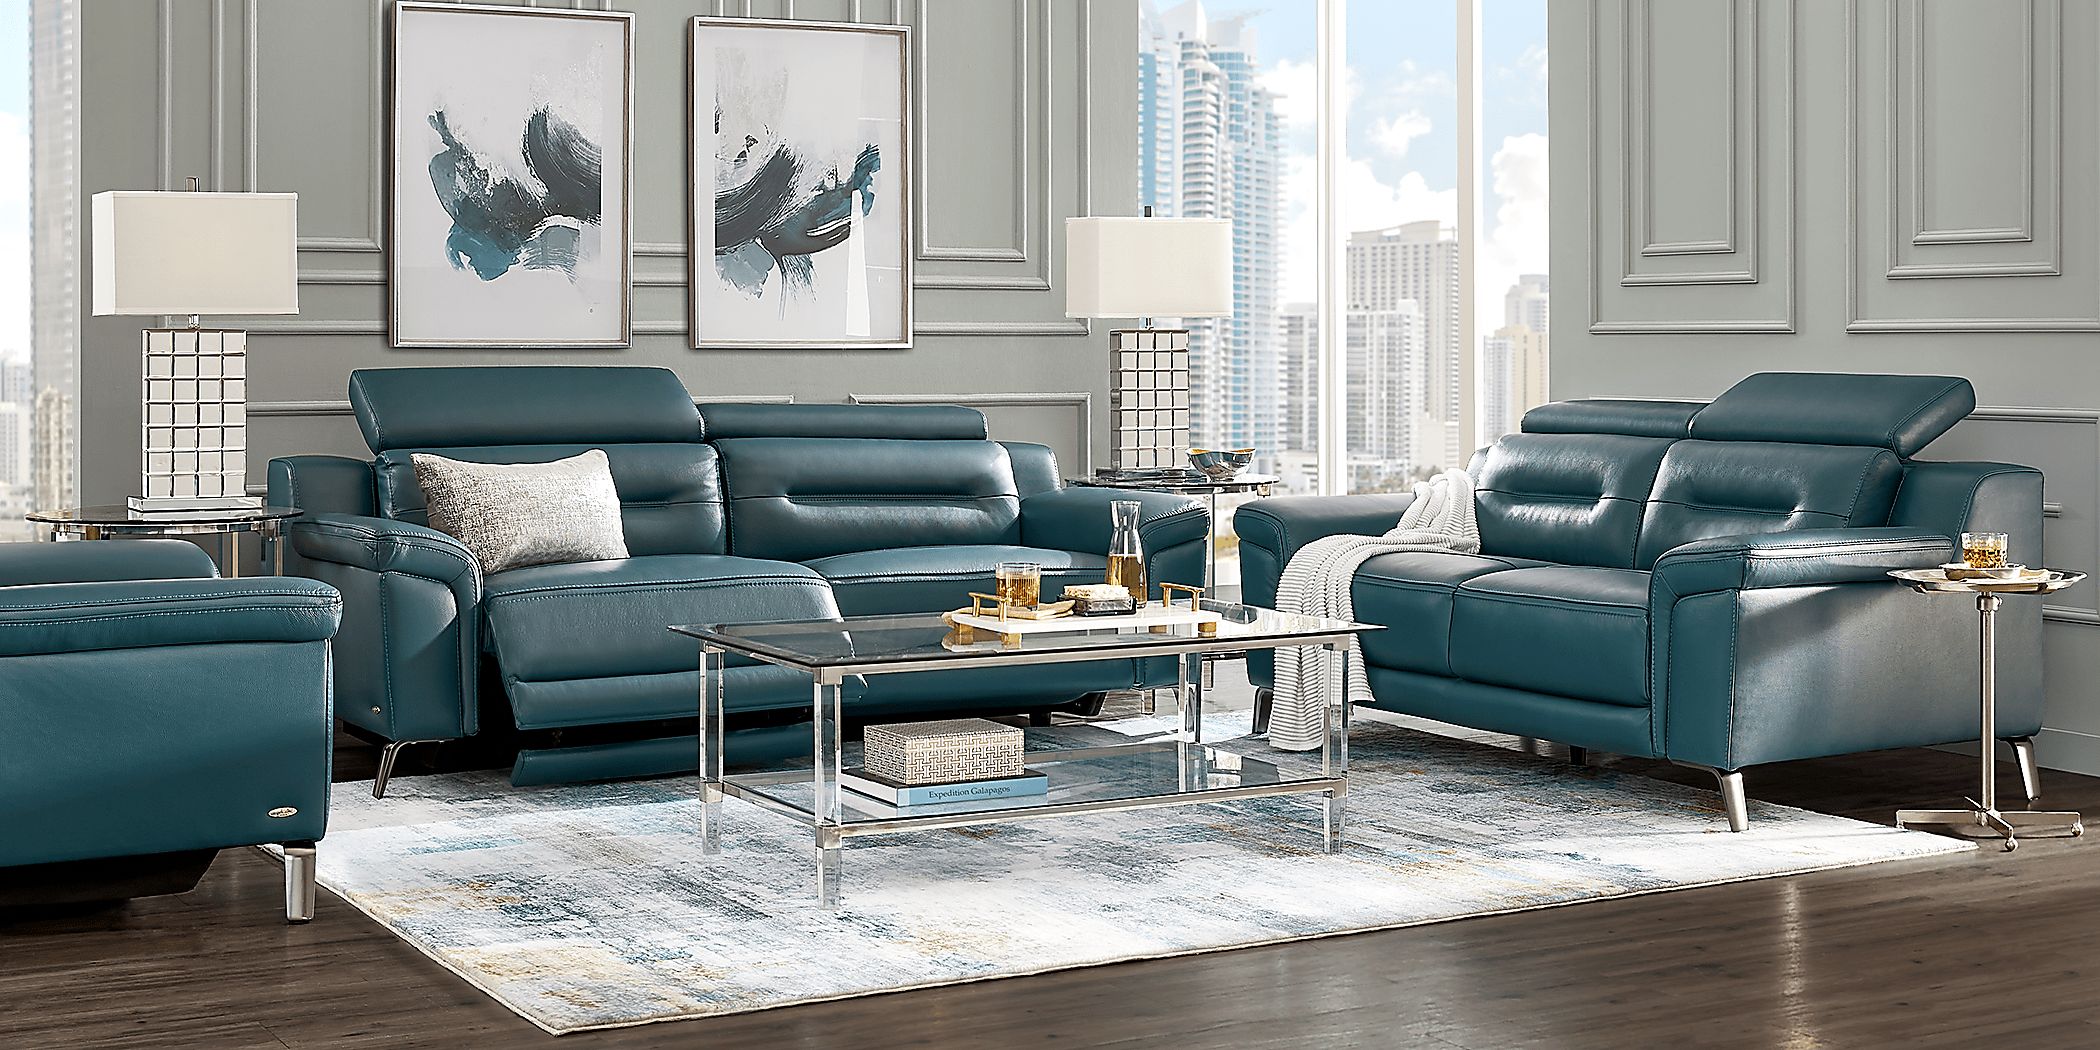 Castella Teal Leather 8 Pc Dual Power Reclining Living Room